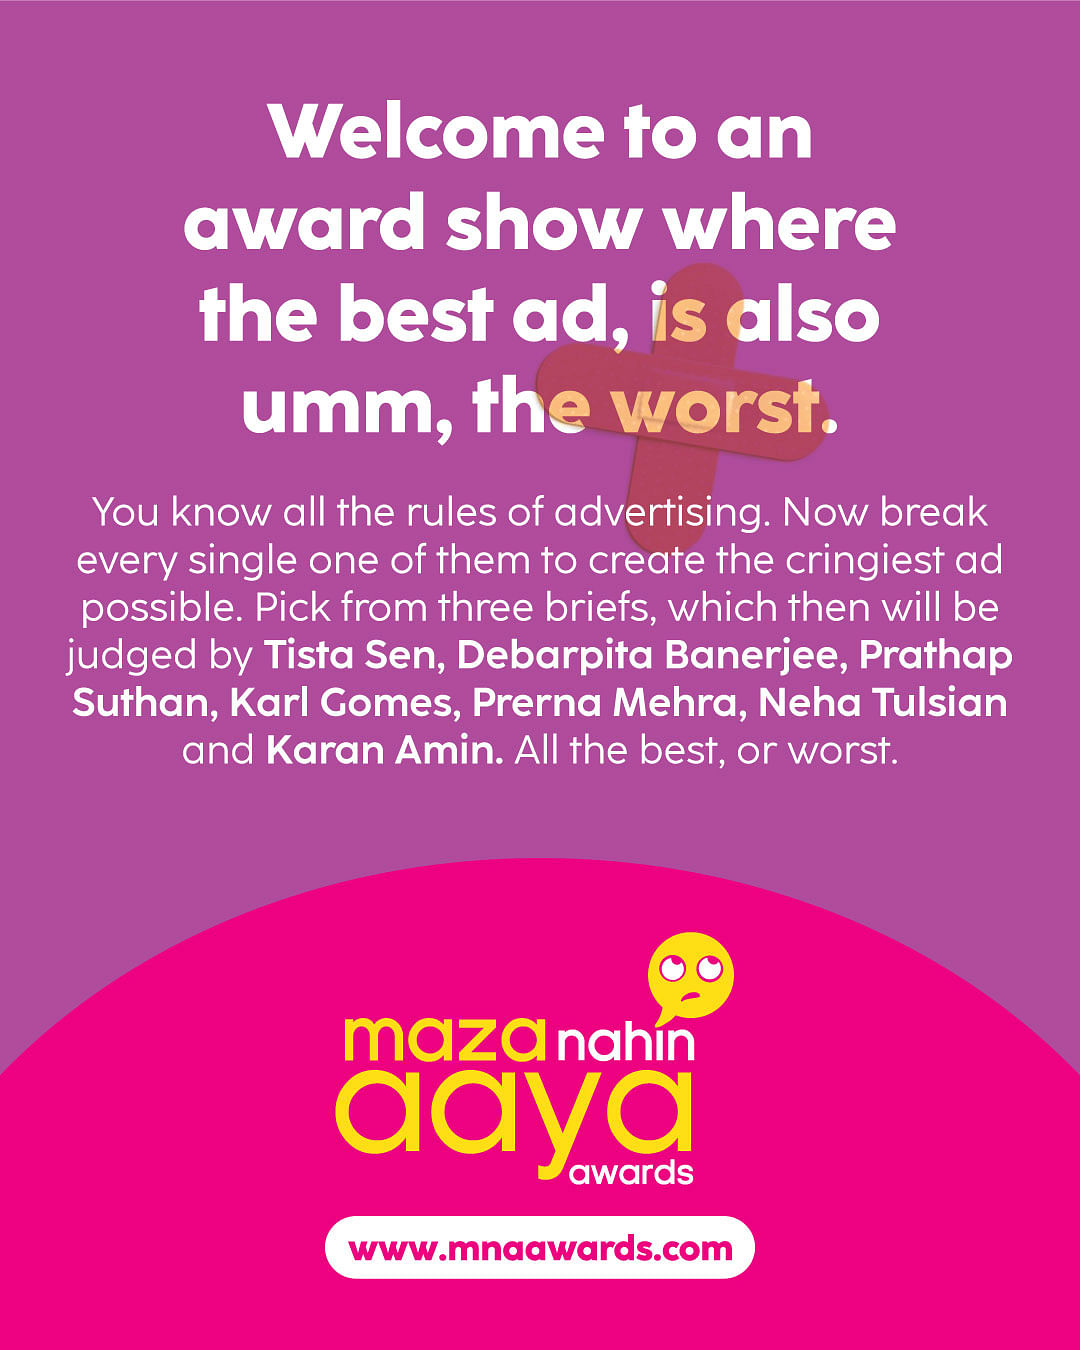 Tired of clients saying 'maza nahin aaya'? There's an award for that